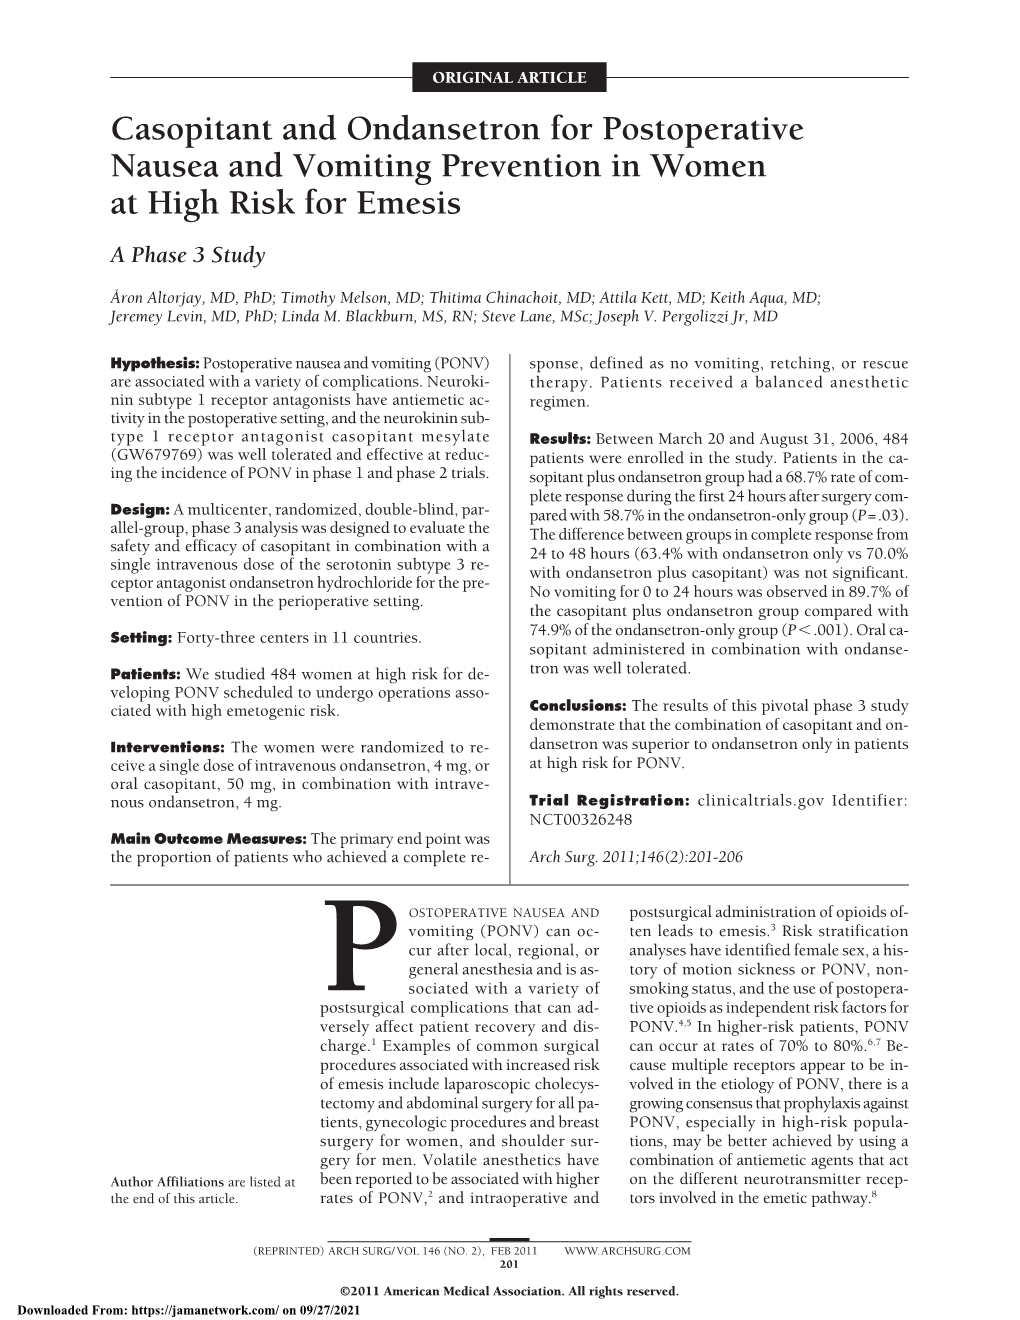 Casopitant and Ondansetron for Postoperative Nausea and Vomiting Prevention in Women at High Risk for Emesis a Phase 3 Study